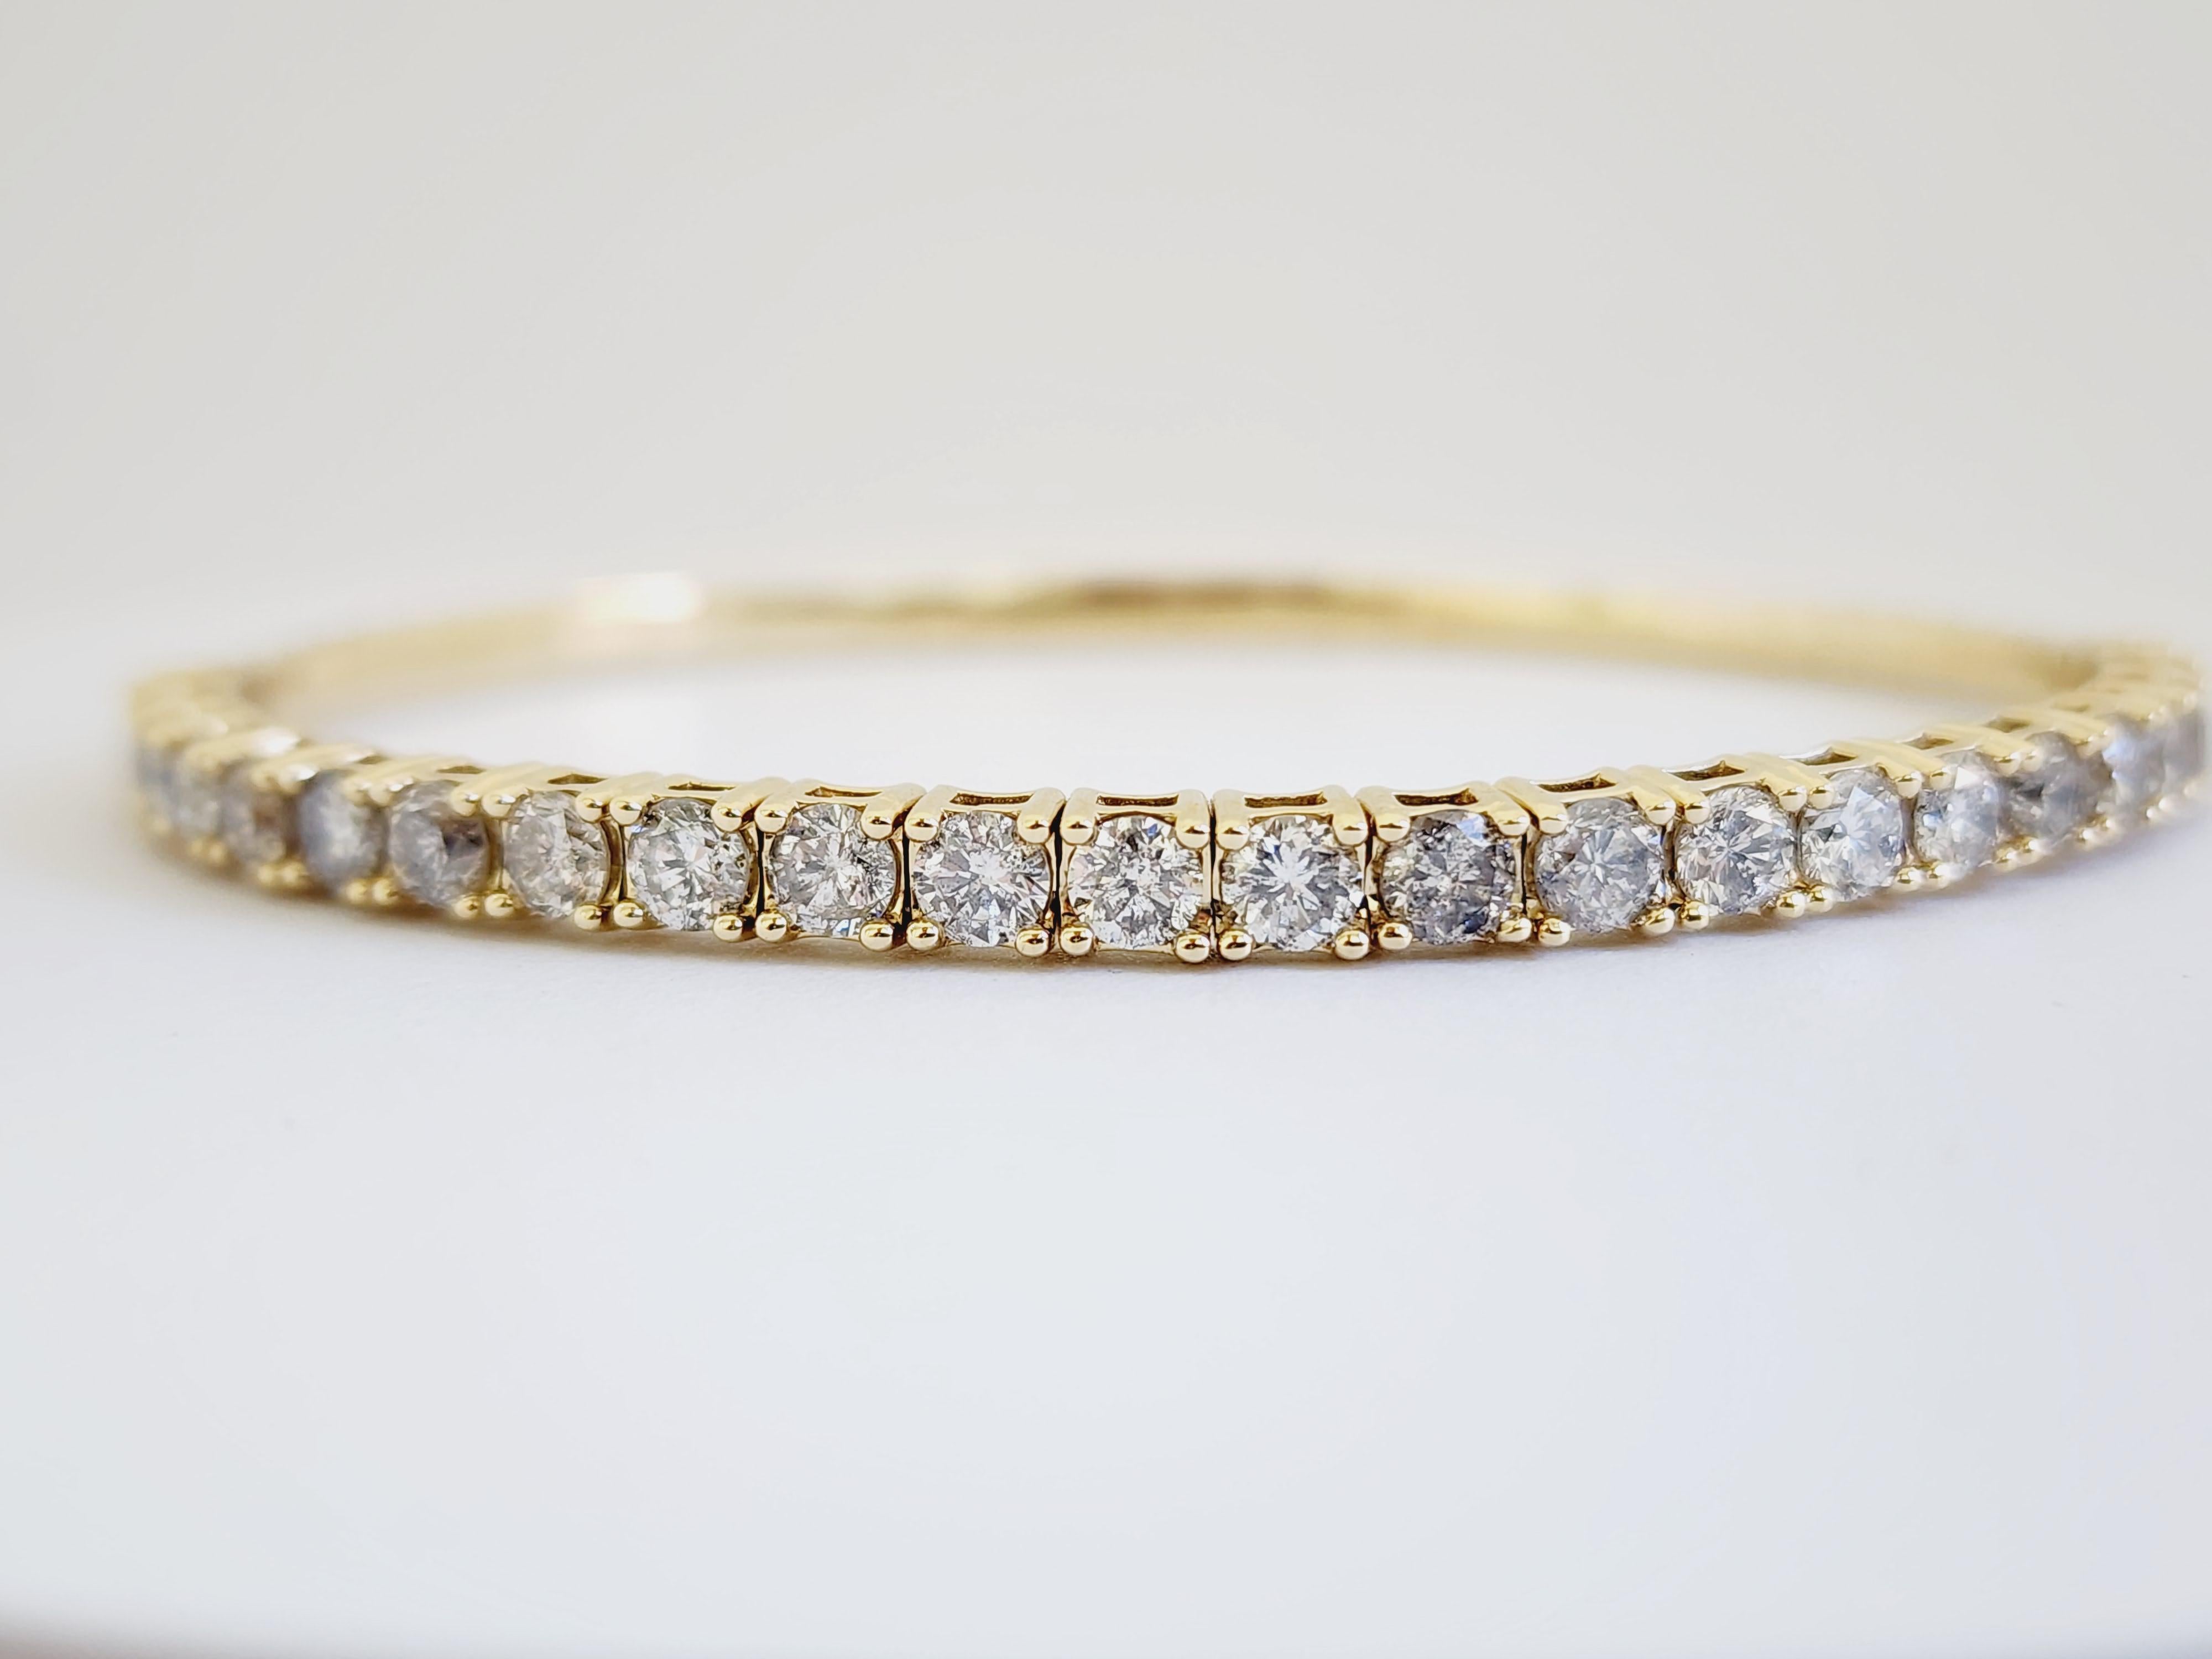 Natural Diamonds 3.73 ctw flexible halfway around bangle yellow gold 14k.
Average Color H, Clarity I, 3.80 mm wide. 7 Inch. 